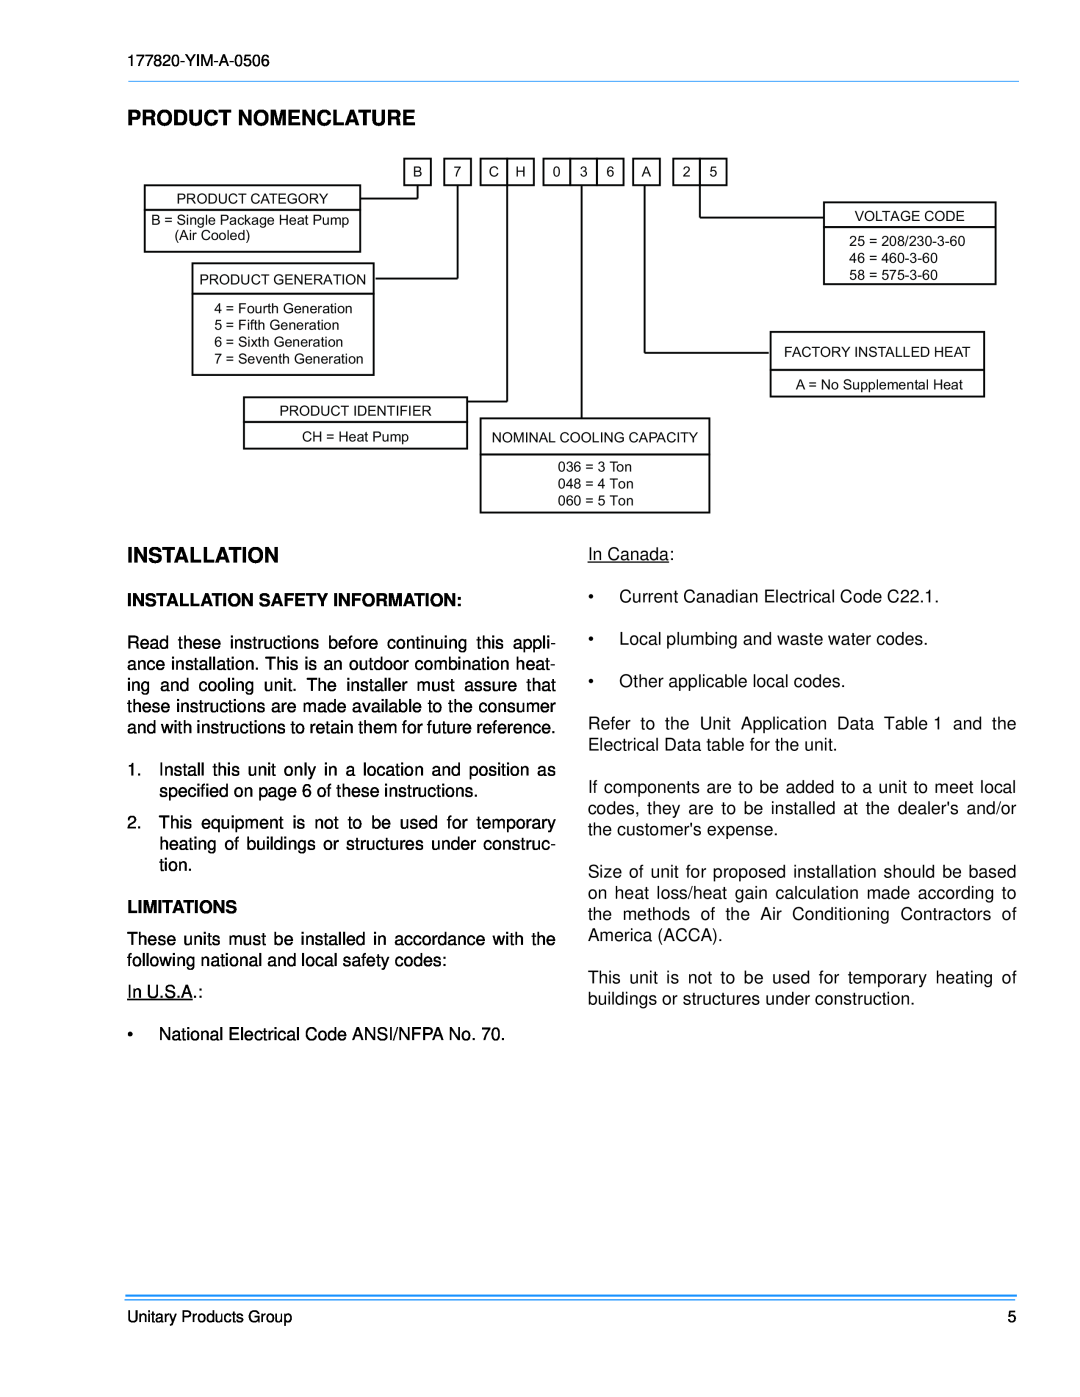 York 048 & 060, BCH 036 installation manual Product Nomenclature, Installation Safety Information, Limitations 